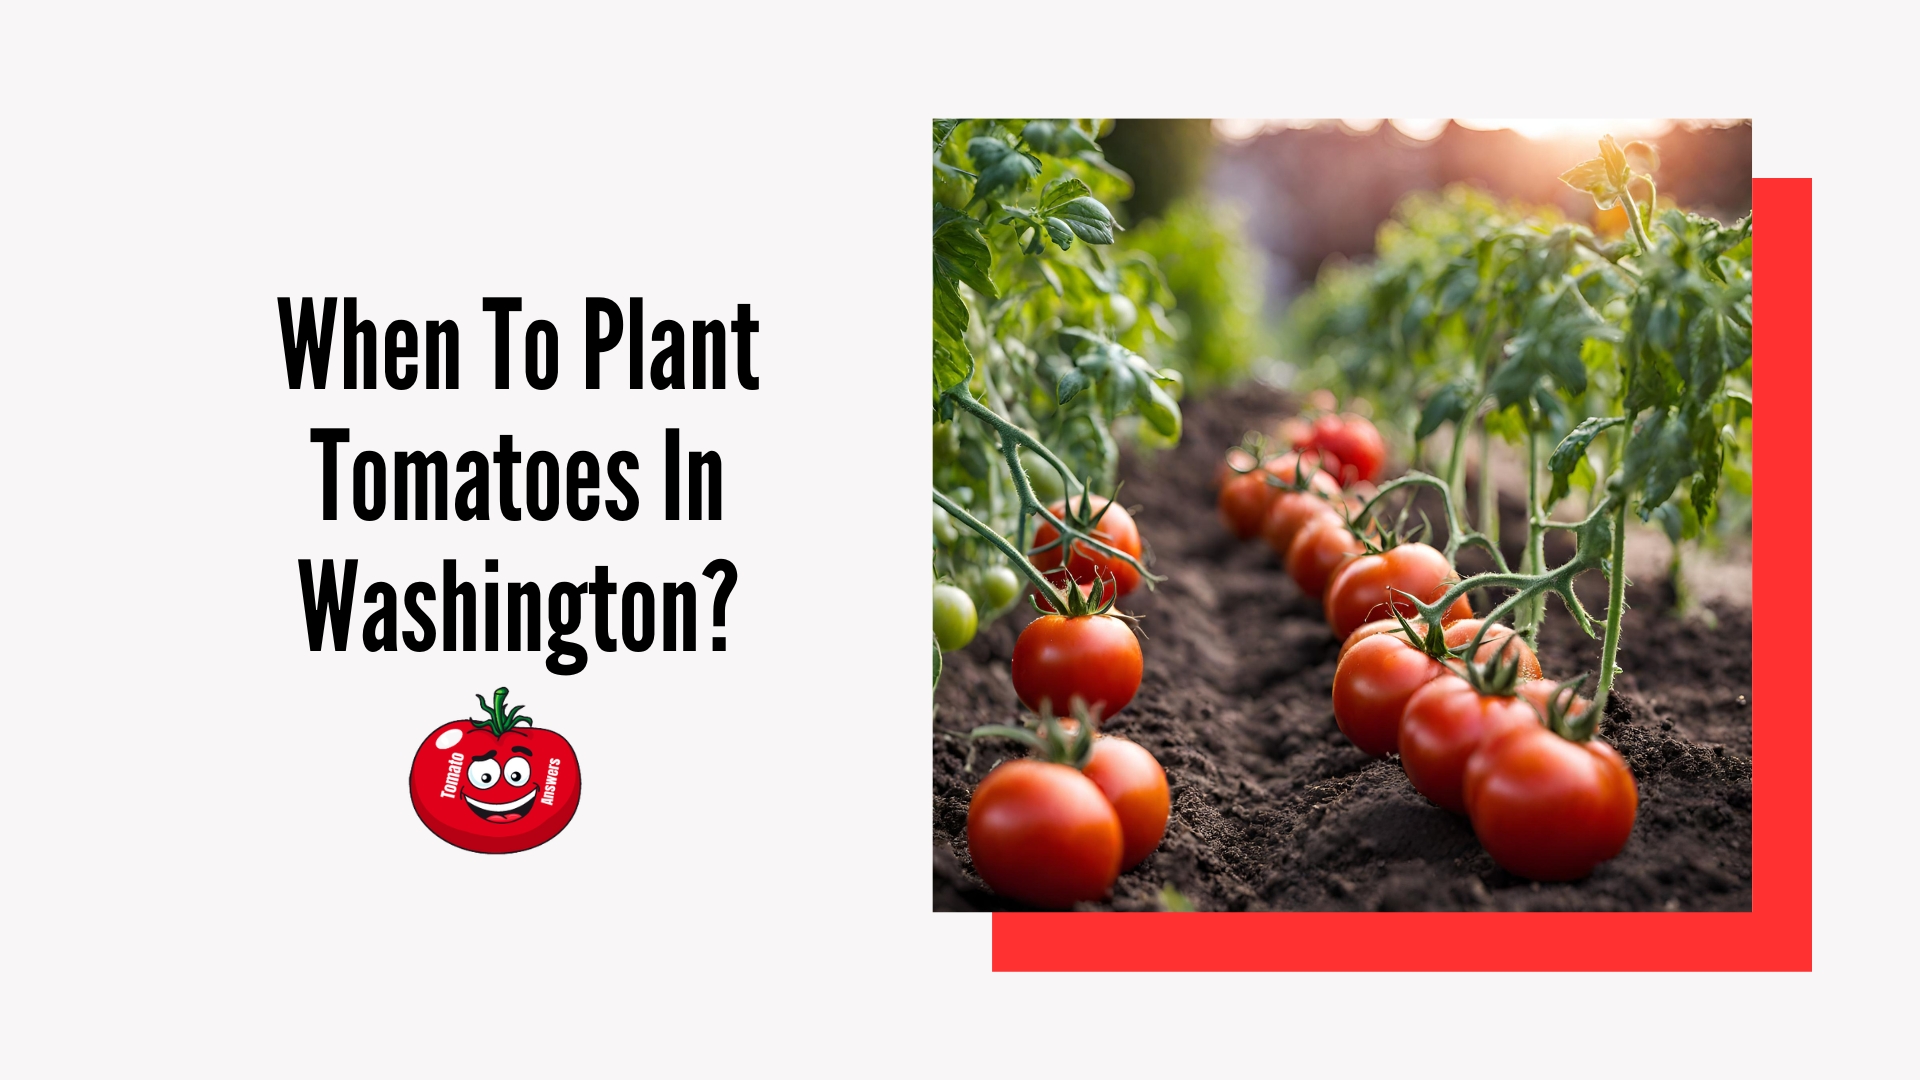 When To Plant Tomatoes In Washington?